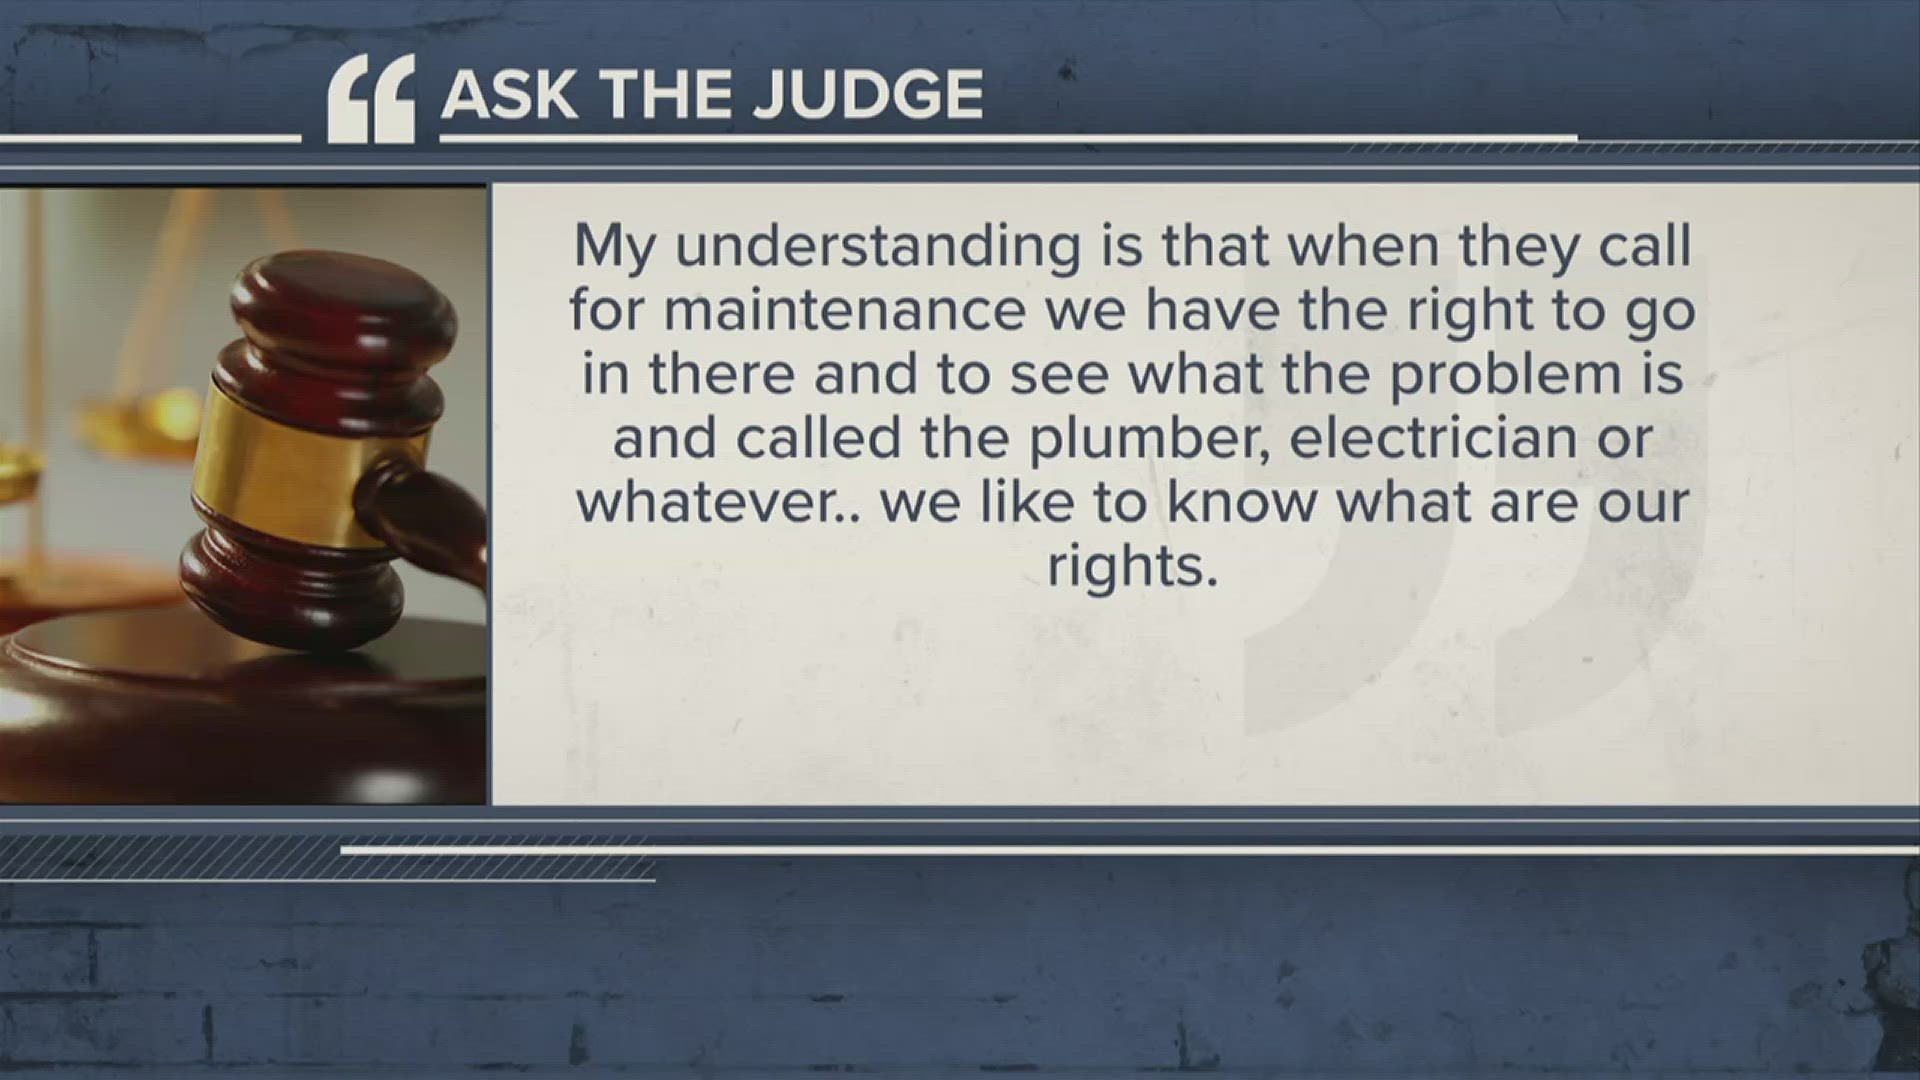 Watch "Ask the Judge" Wednesdays on 12News at 5 p.m. Submit your questions at 12NewsNow.com/AskTheJudge